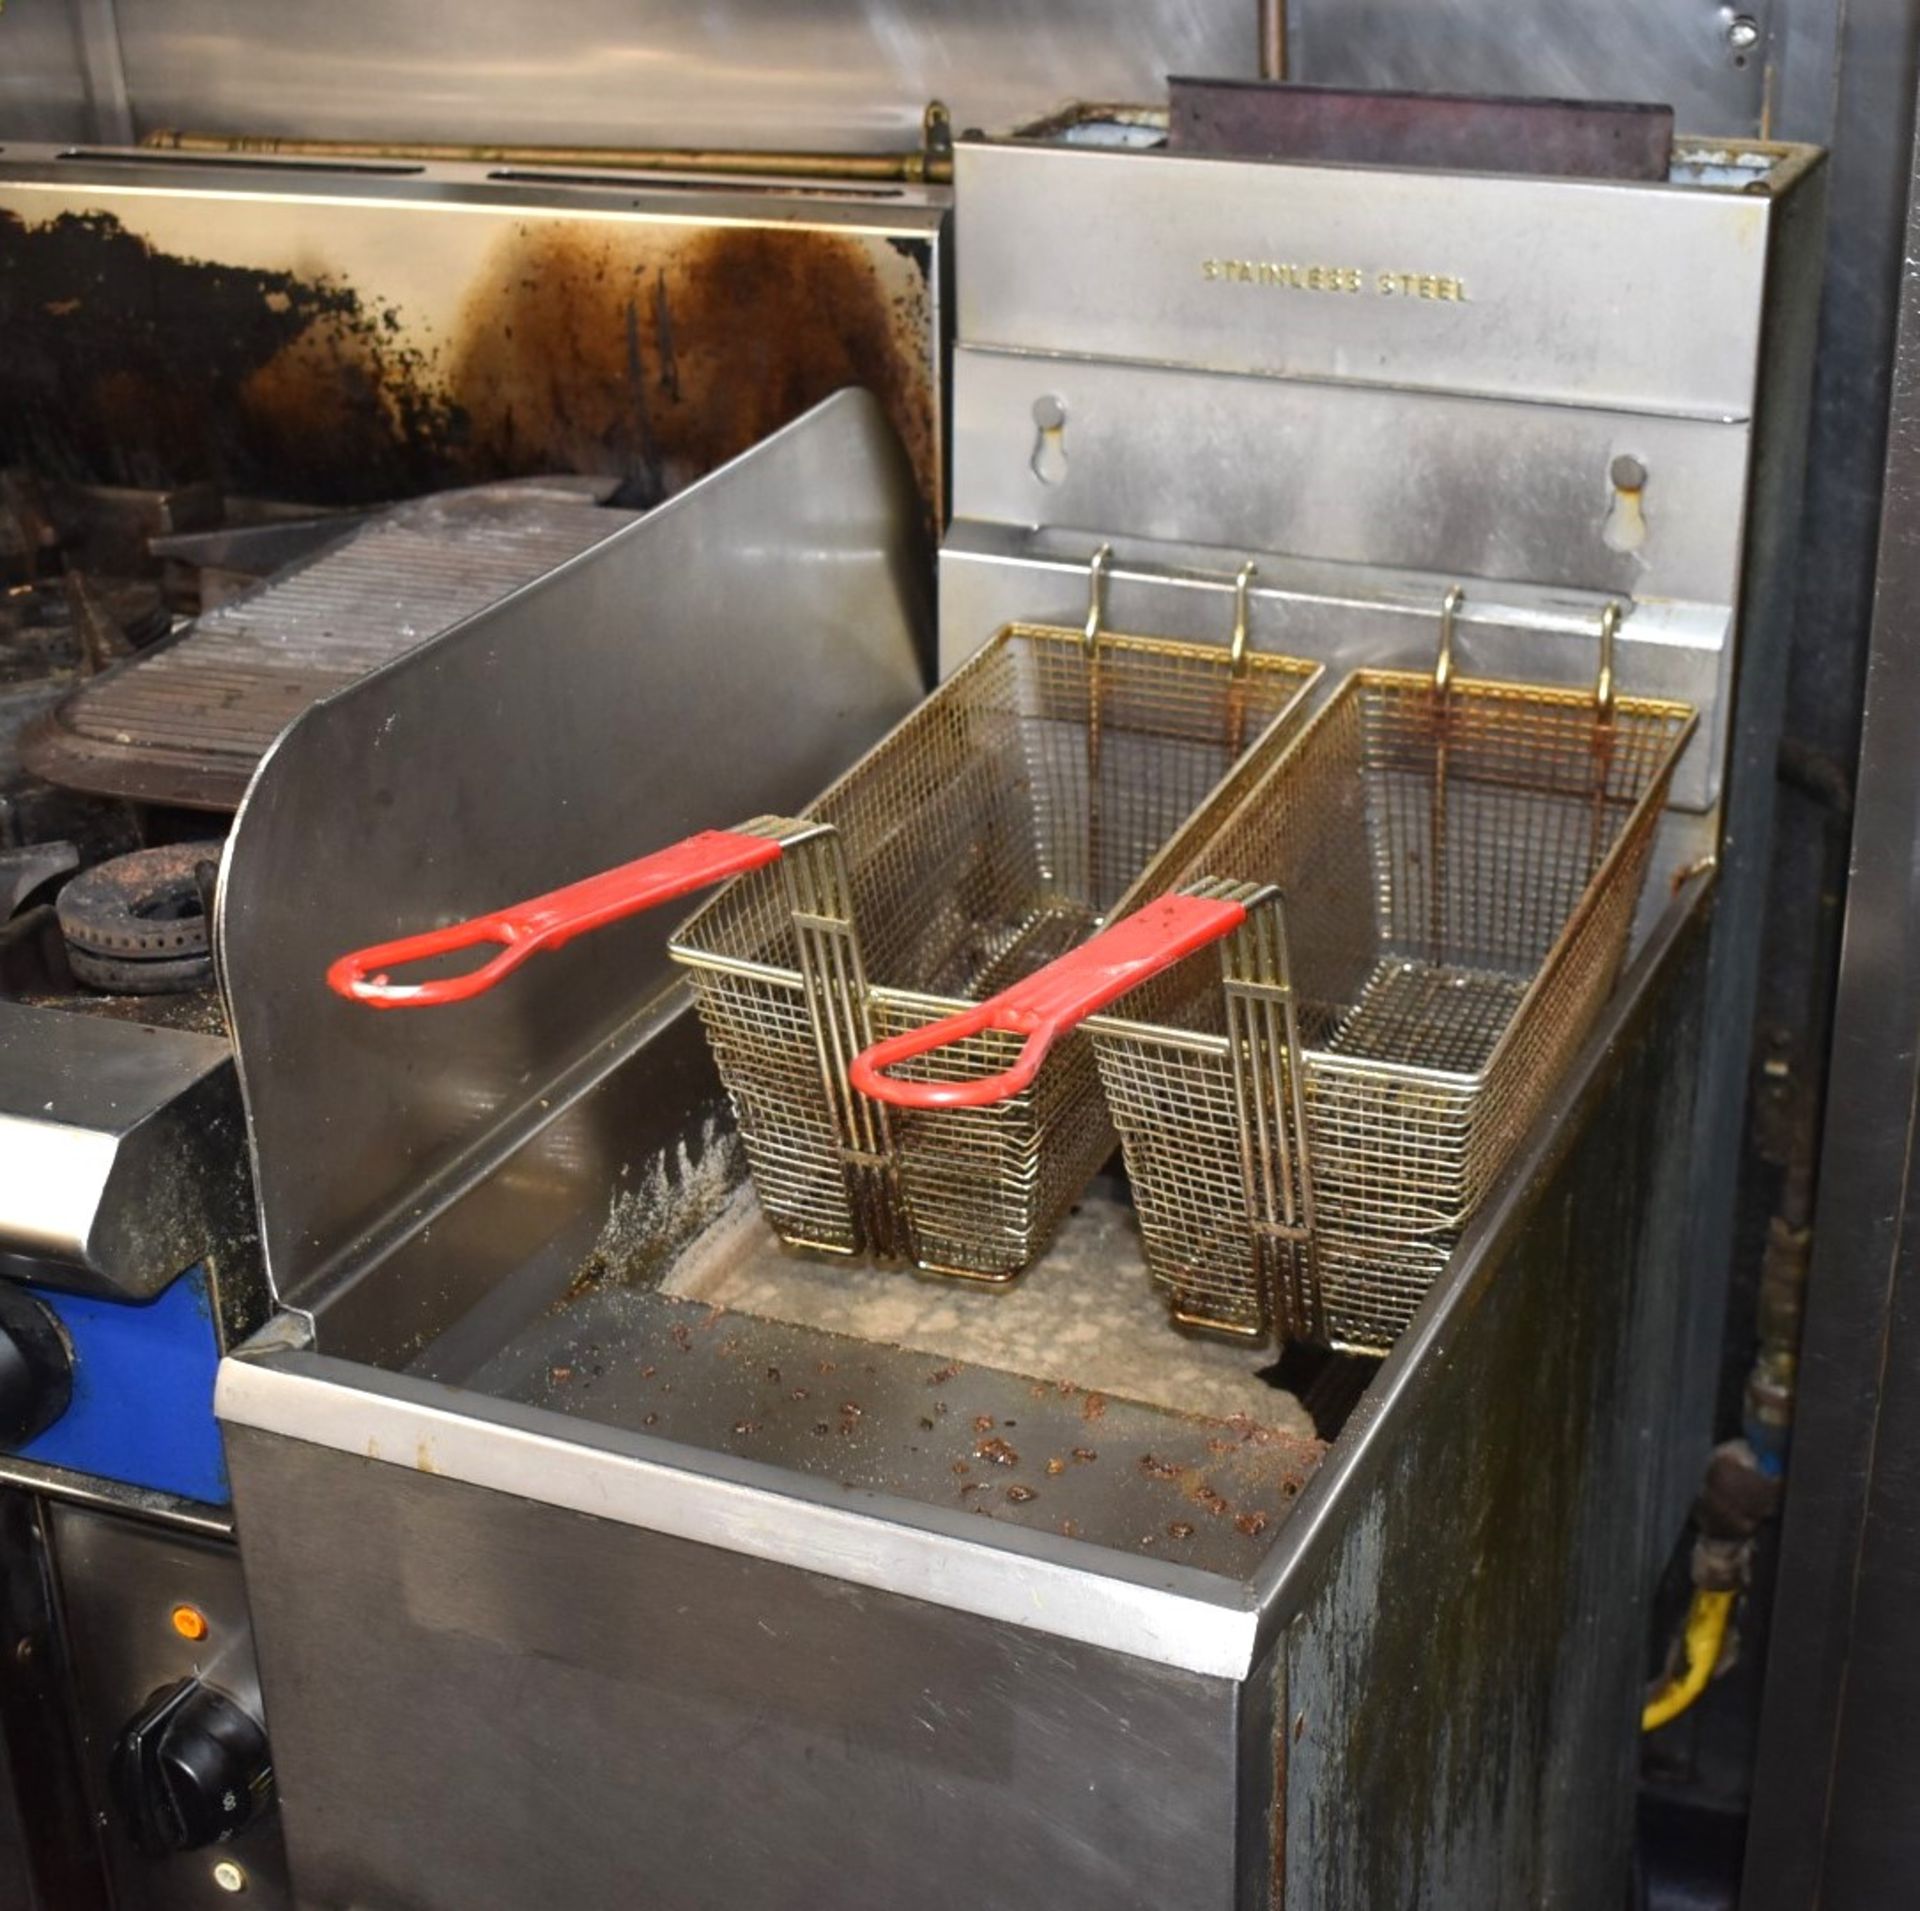 1 x Pitco 35C+ Single Tank 40cm Gas Fryer With Baskets - Image 4 of 5